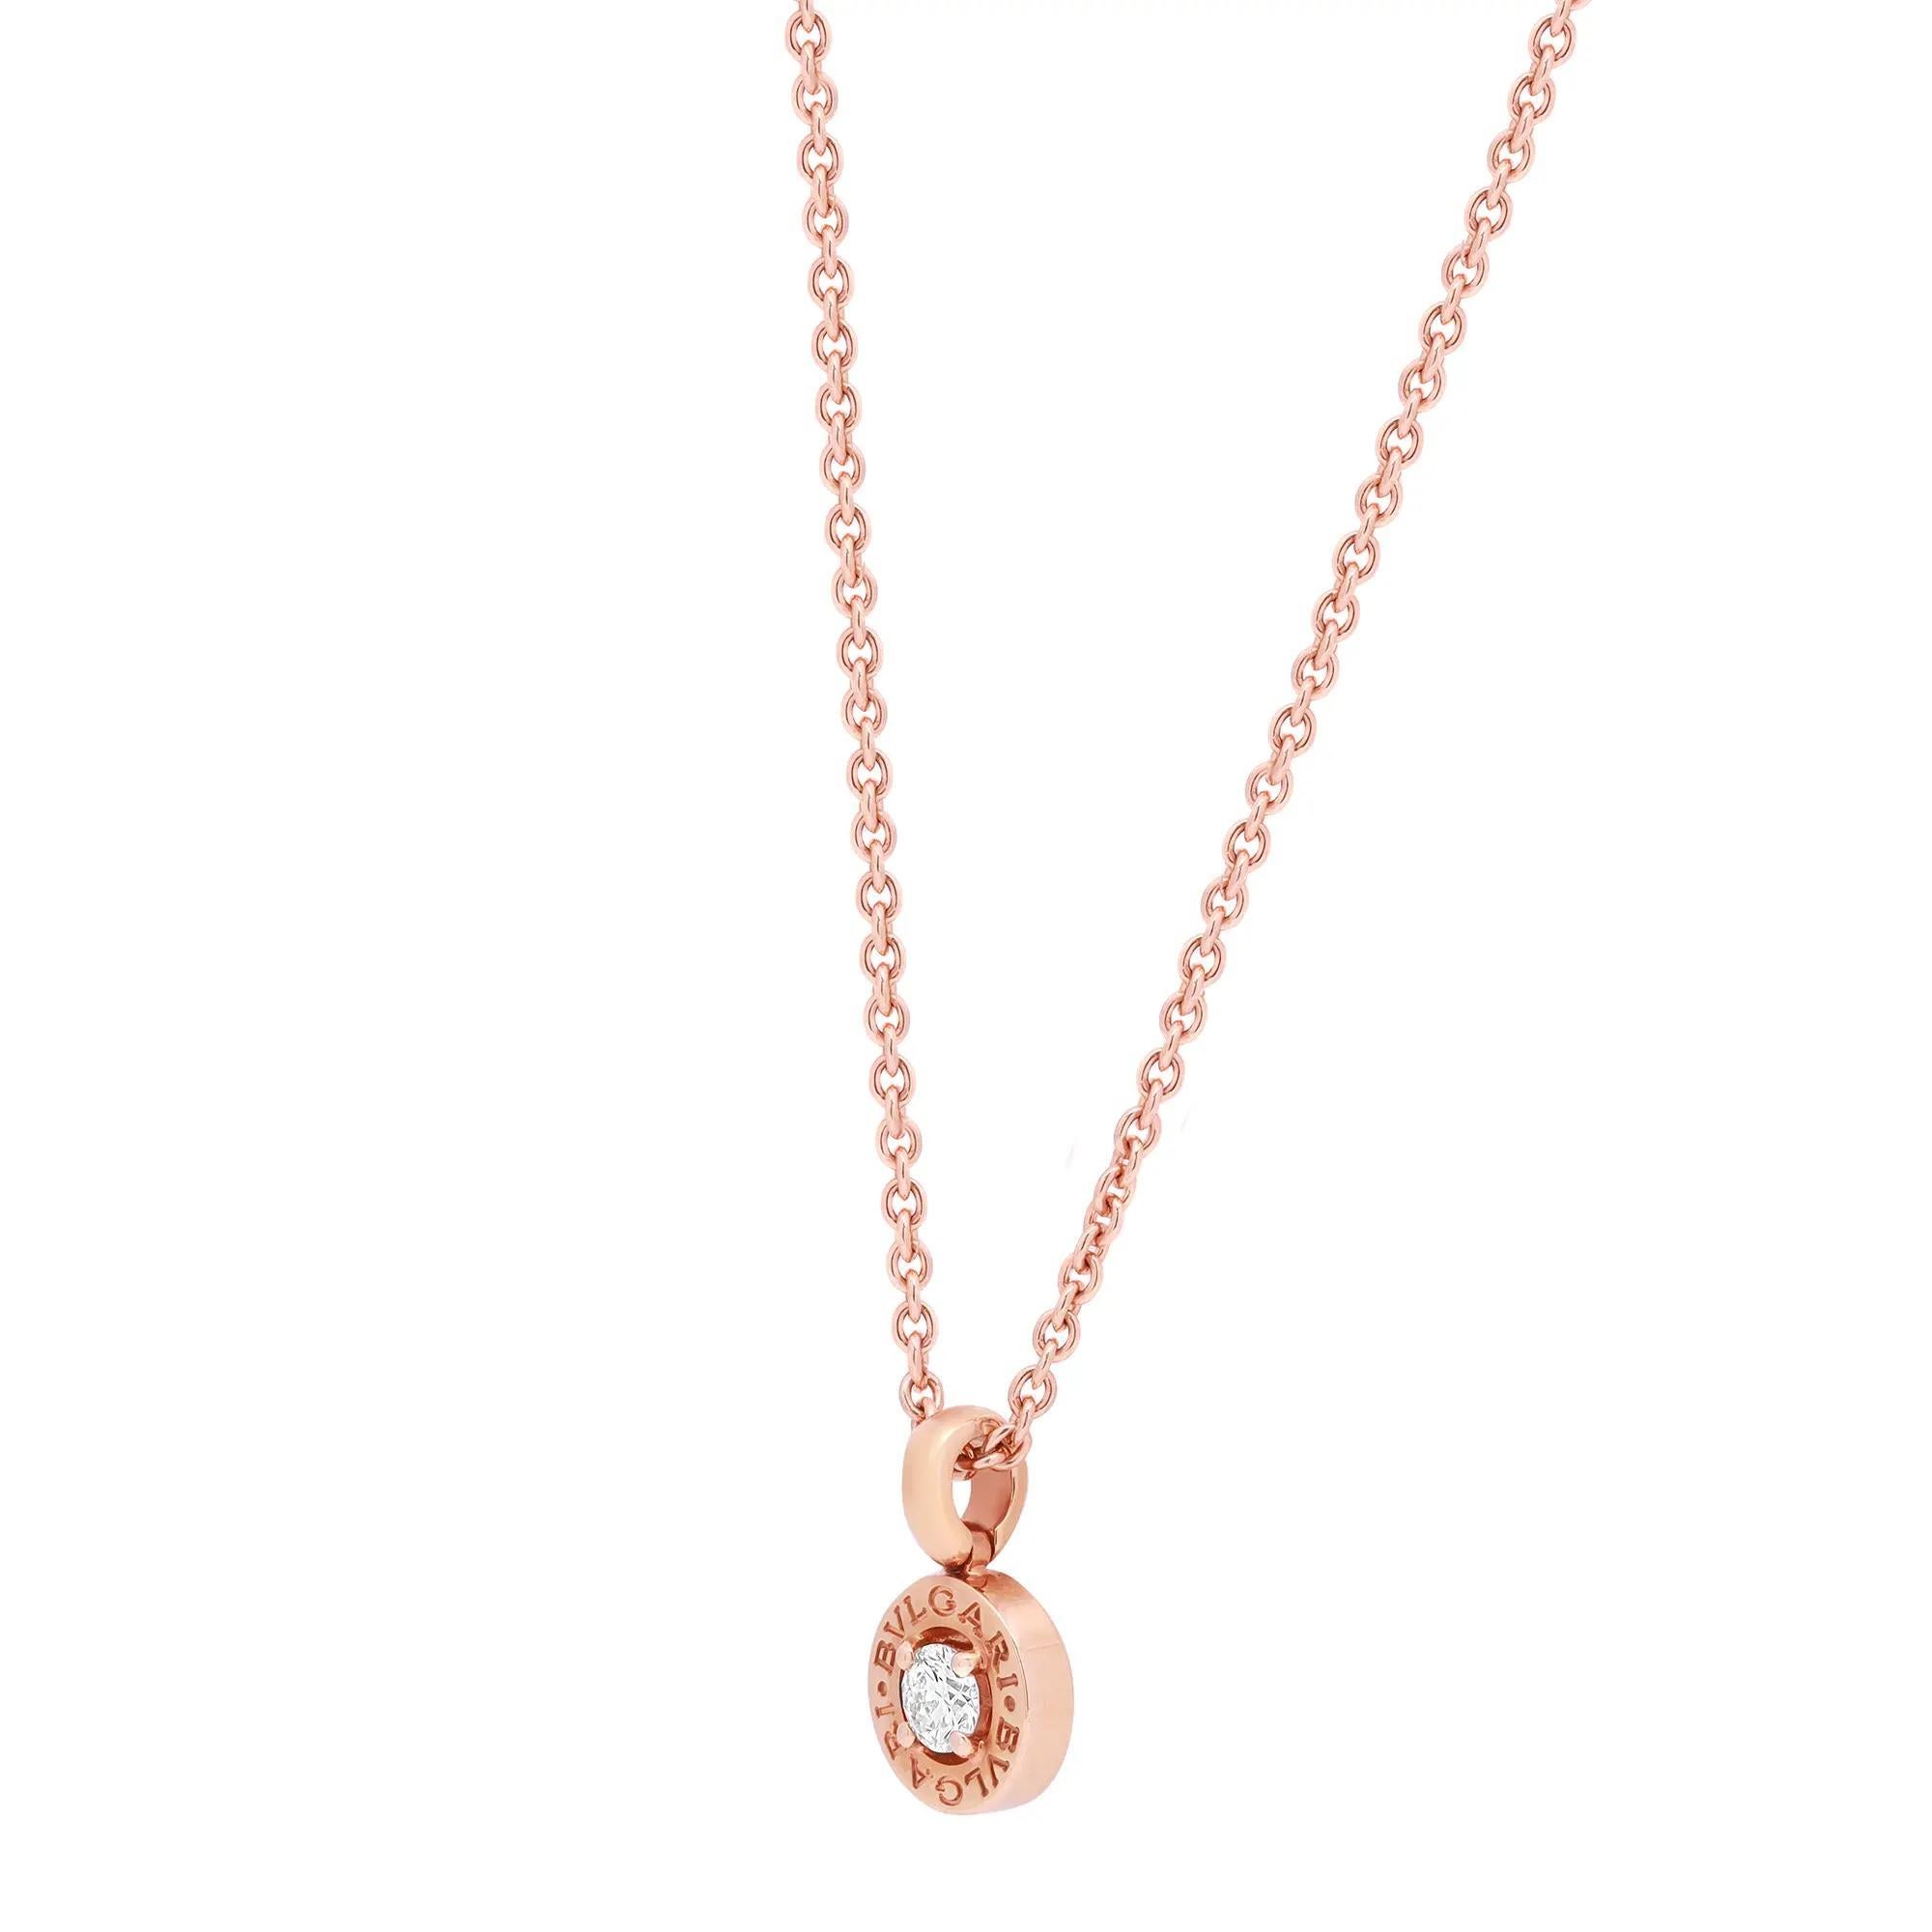 Minimalist yet classy, Bvlgari Bvlgari diamond pendant necklace. Crafted in fine 18K rose gold. This necklace features a center prong set round brilliant cut diamond encrusted in a round Bvlgari Bvlgari stamped pendant with an adjustable cuban link